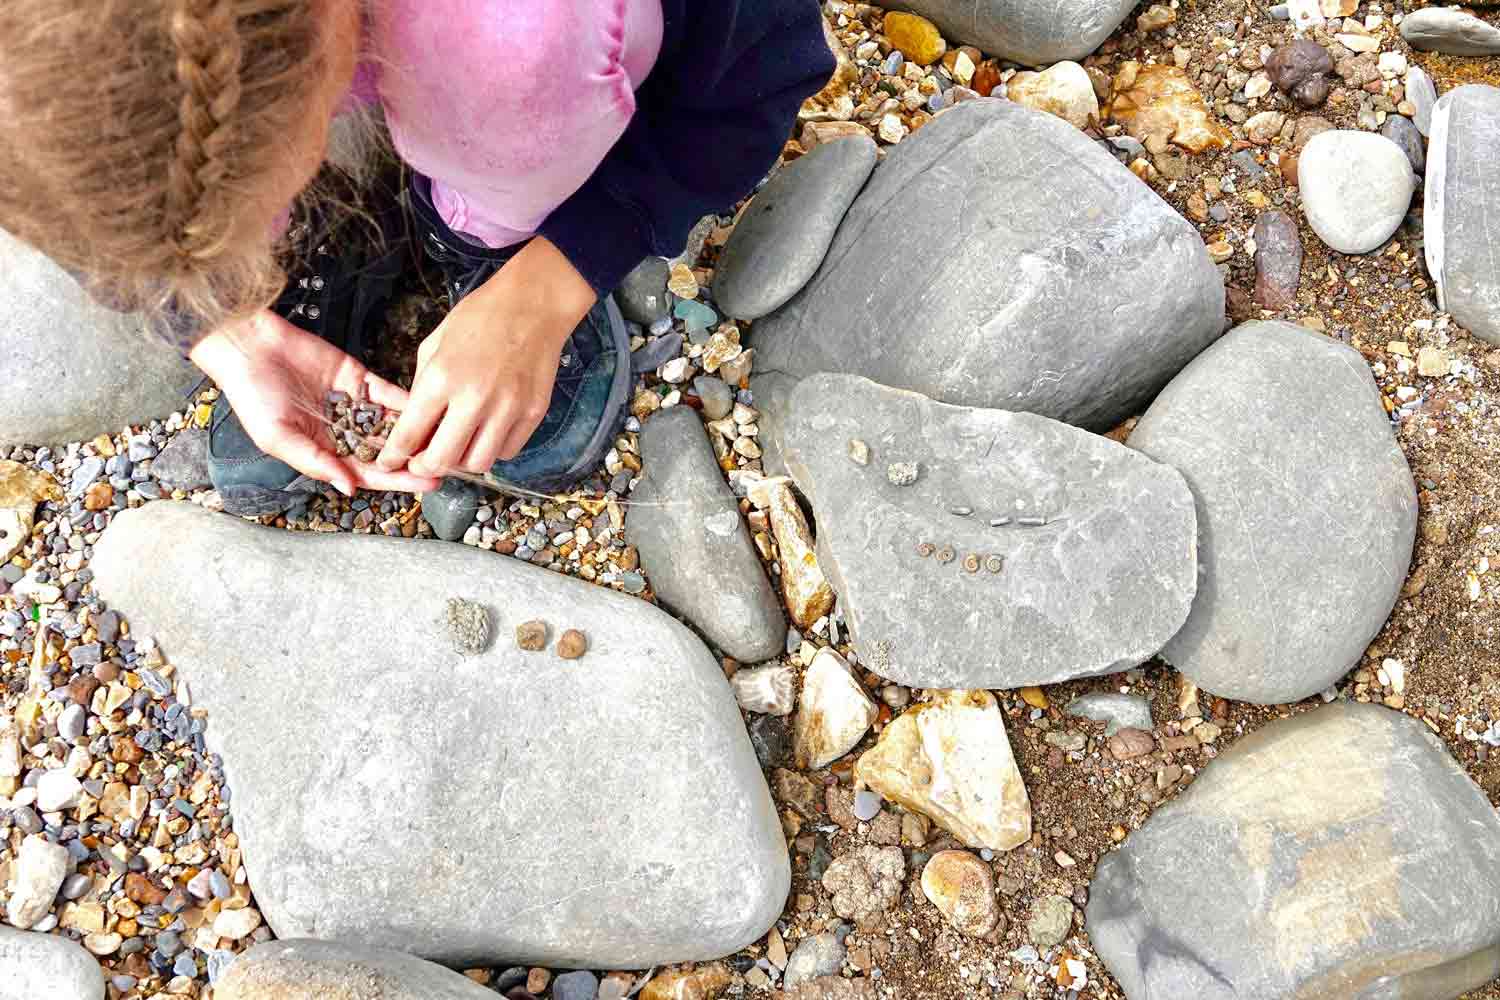 A girl kneels on a pebbly beach with some fossils sitting on large rocks and looks at a handful of pebbles and shells.